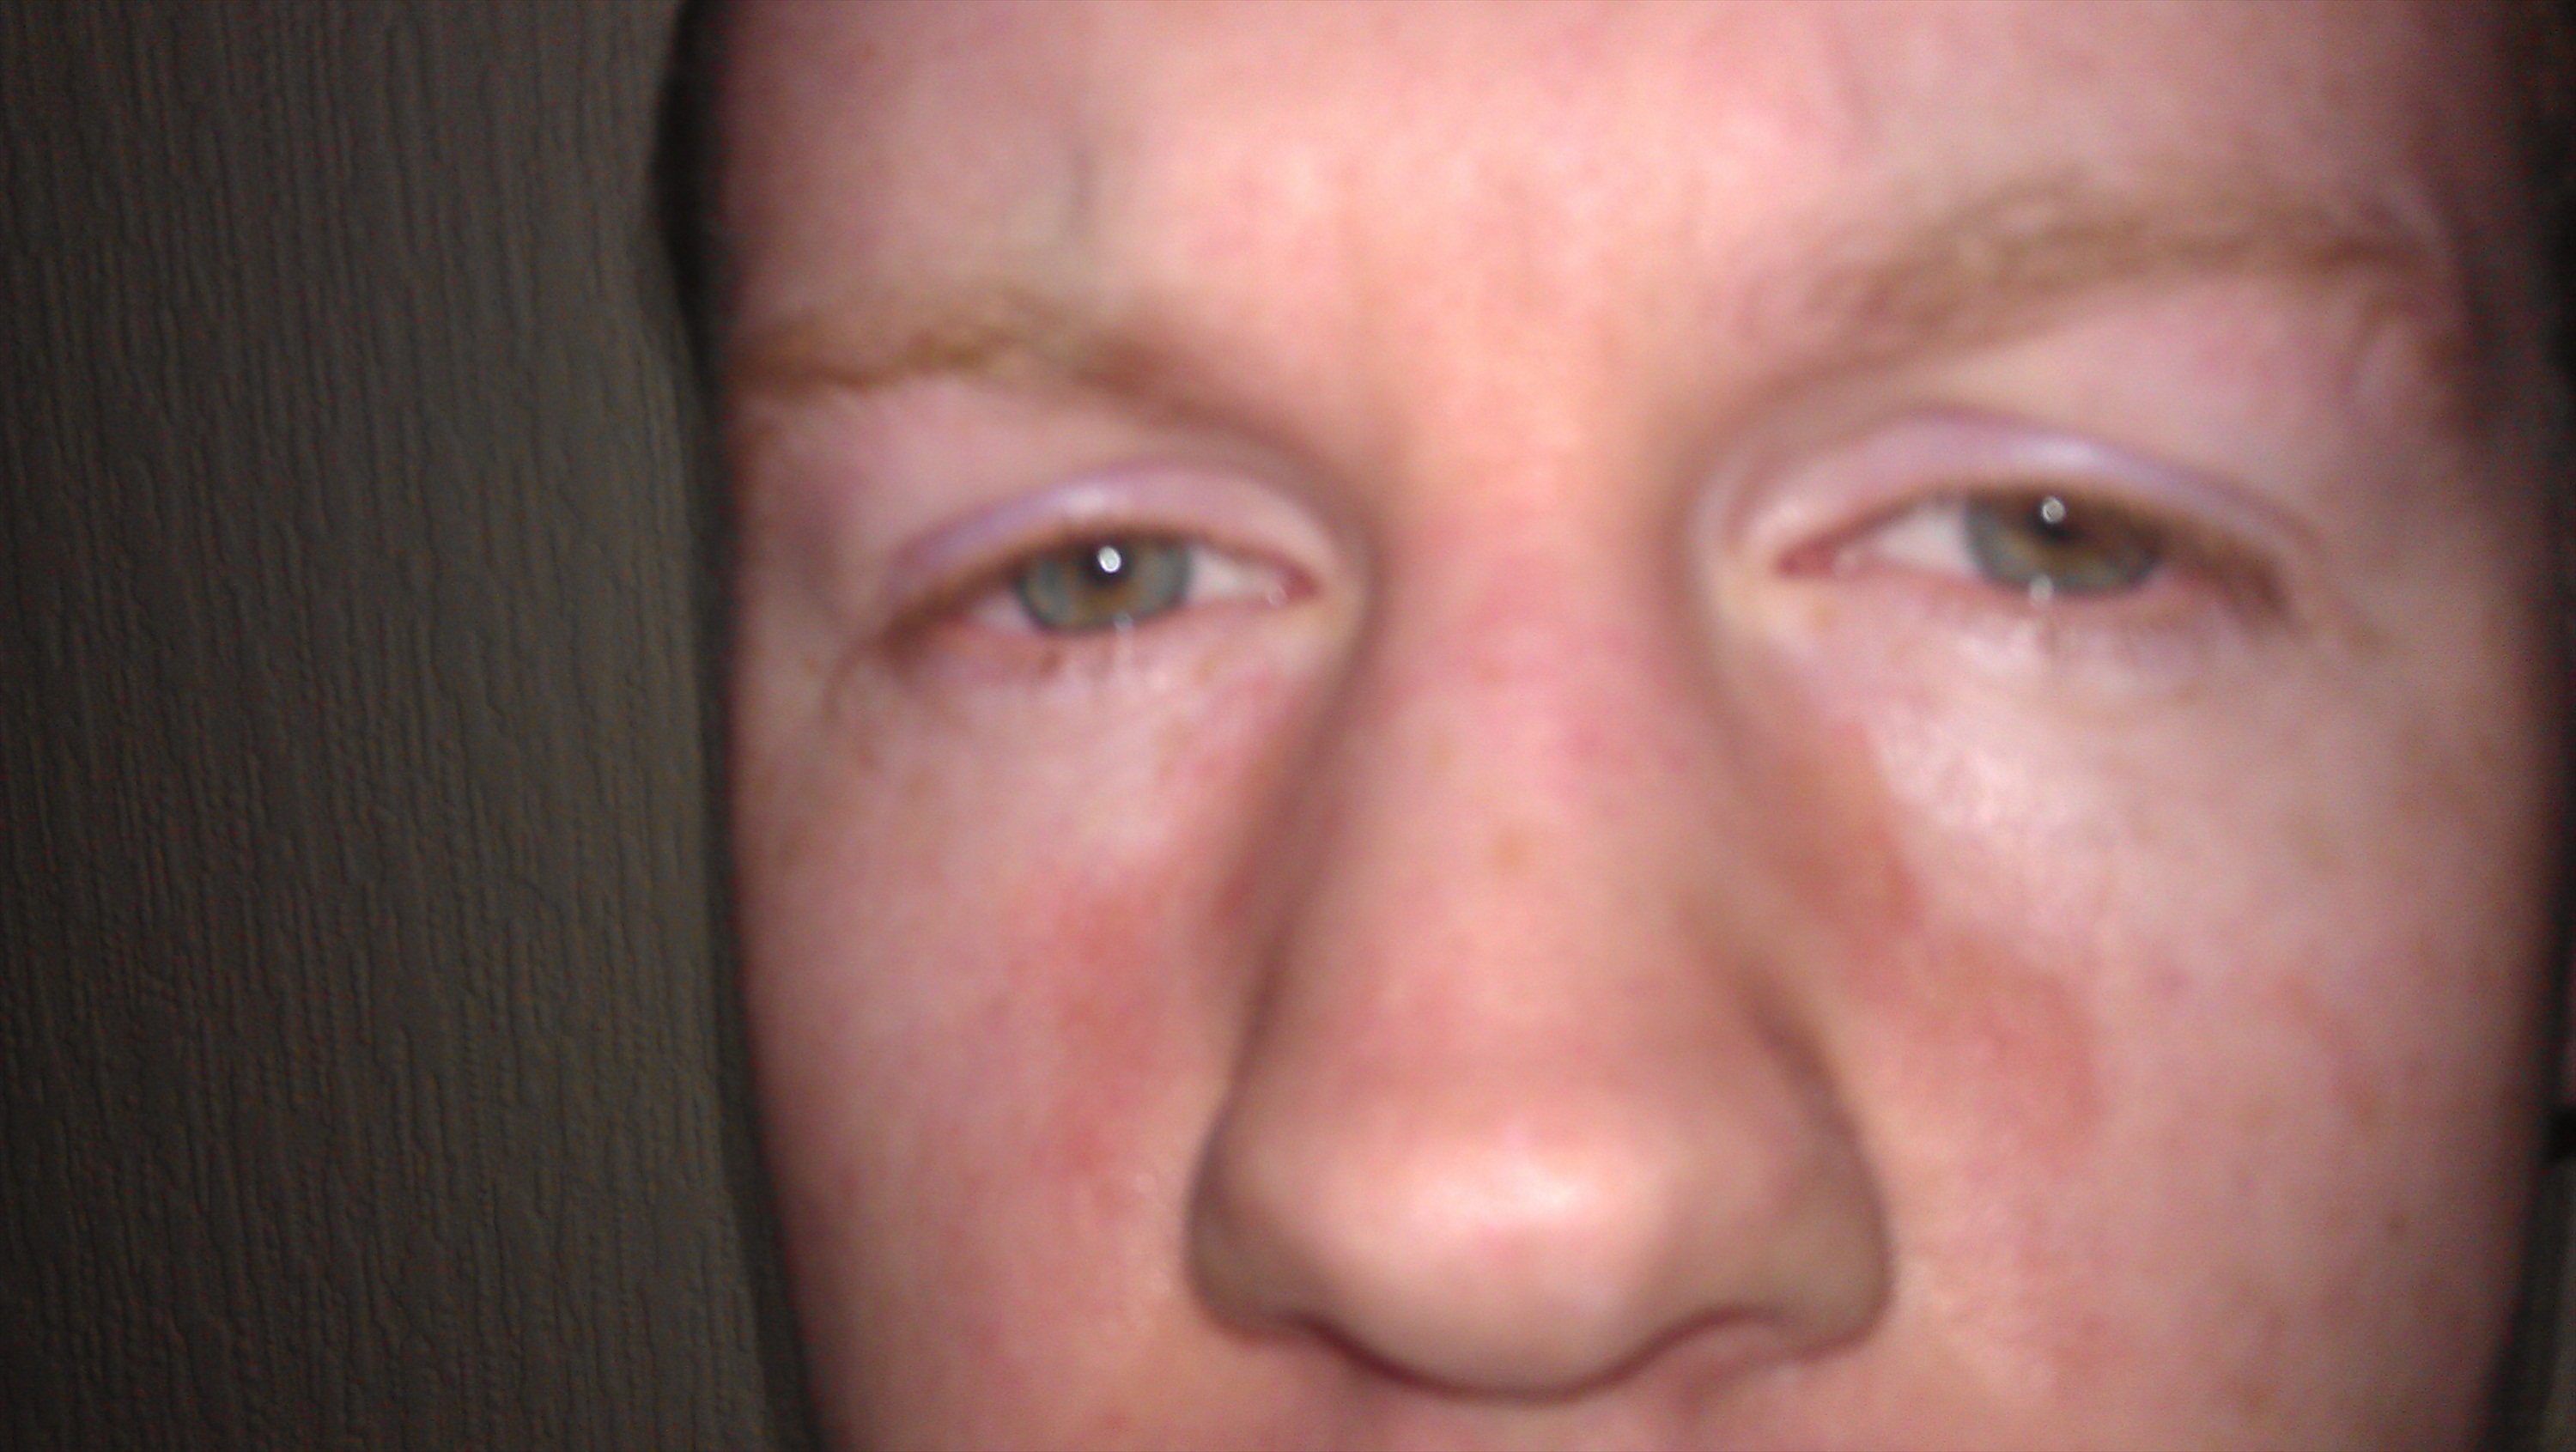 petechiae rash on face after crying torrent